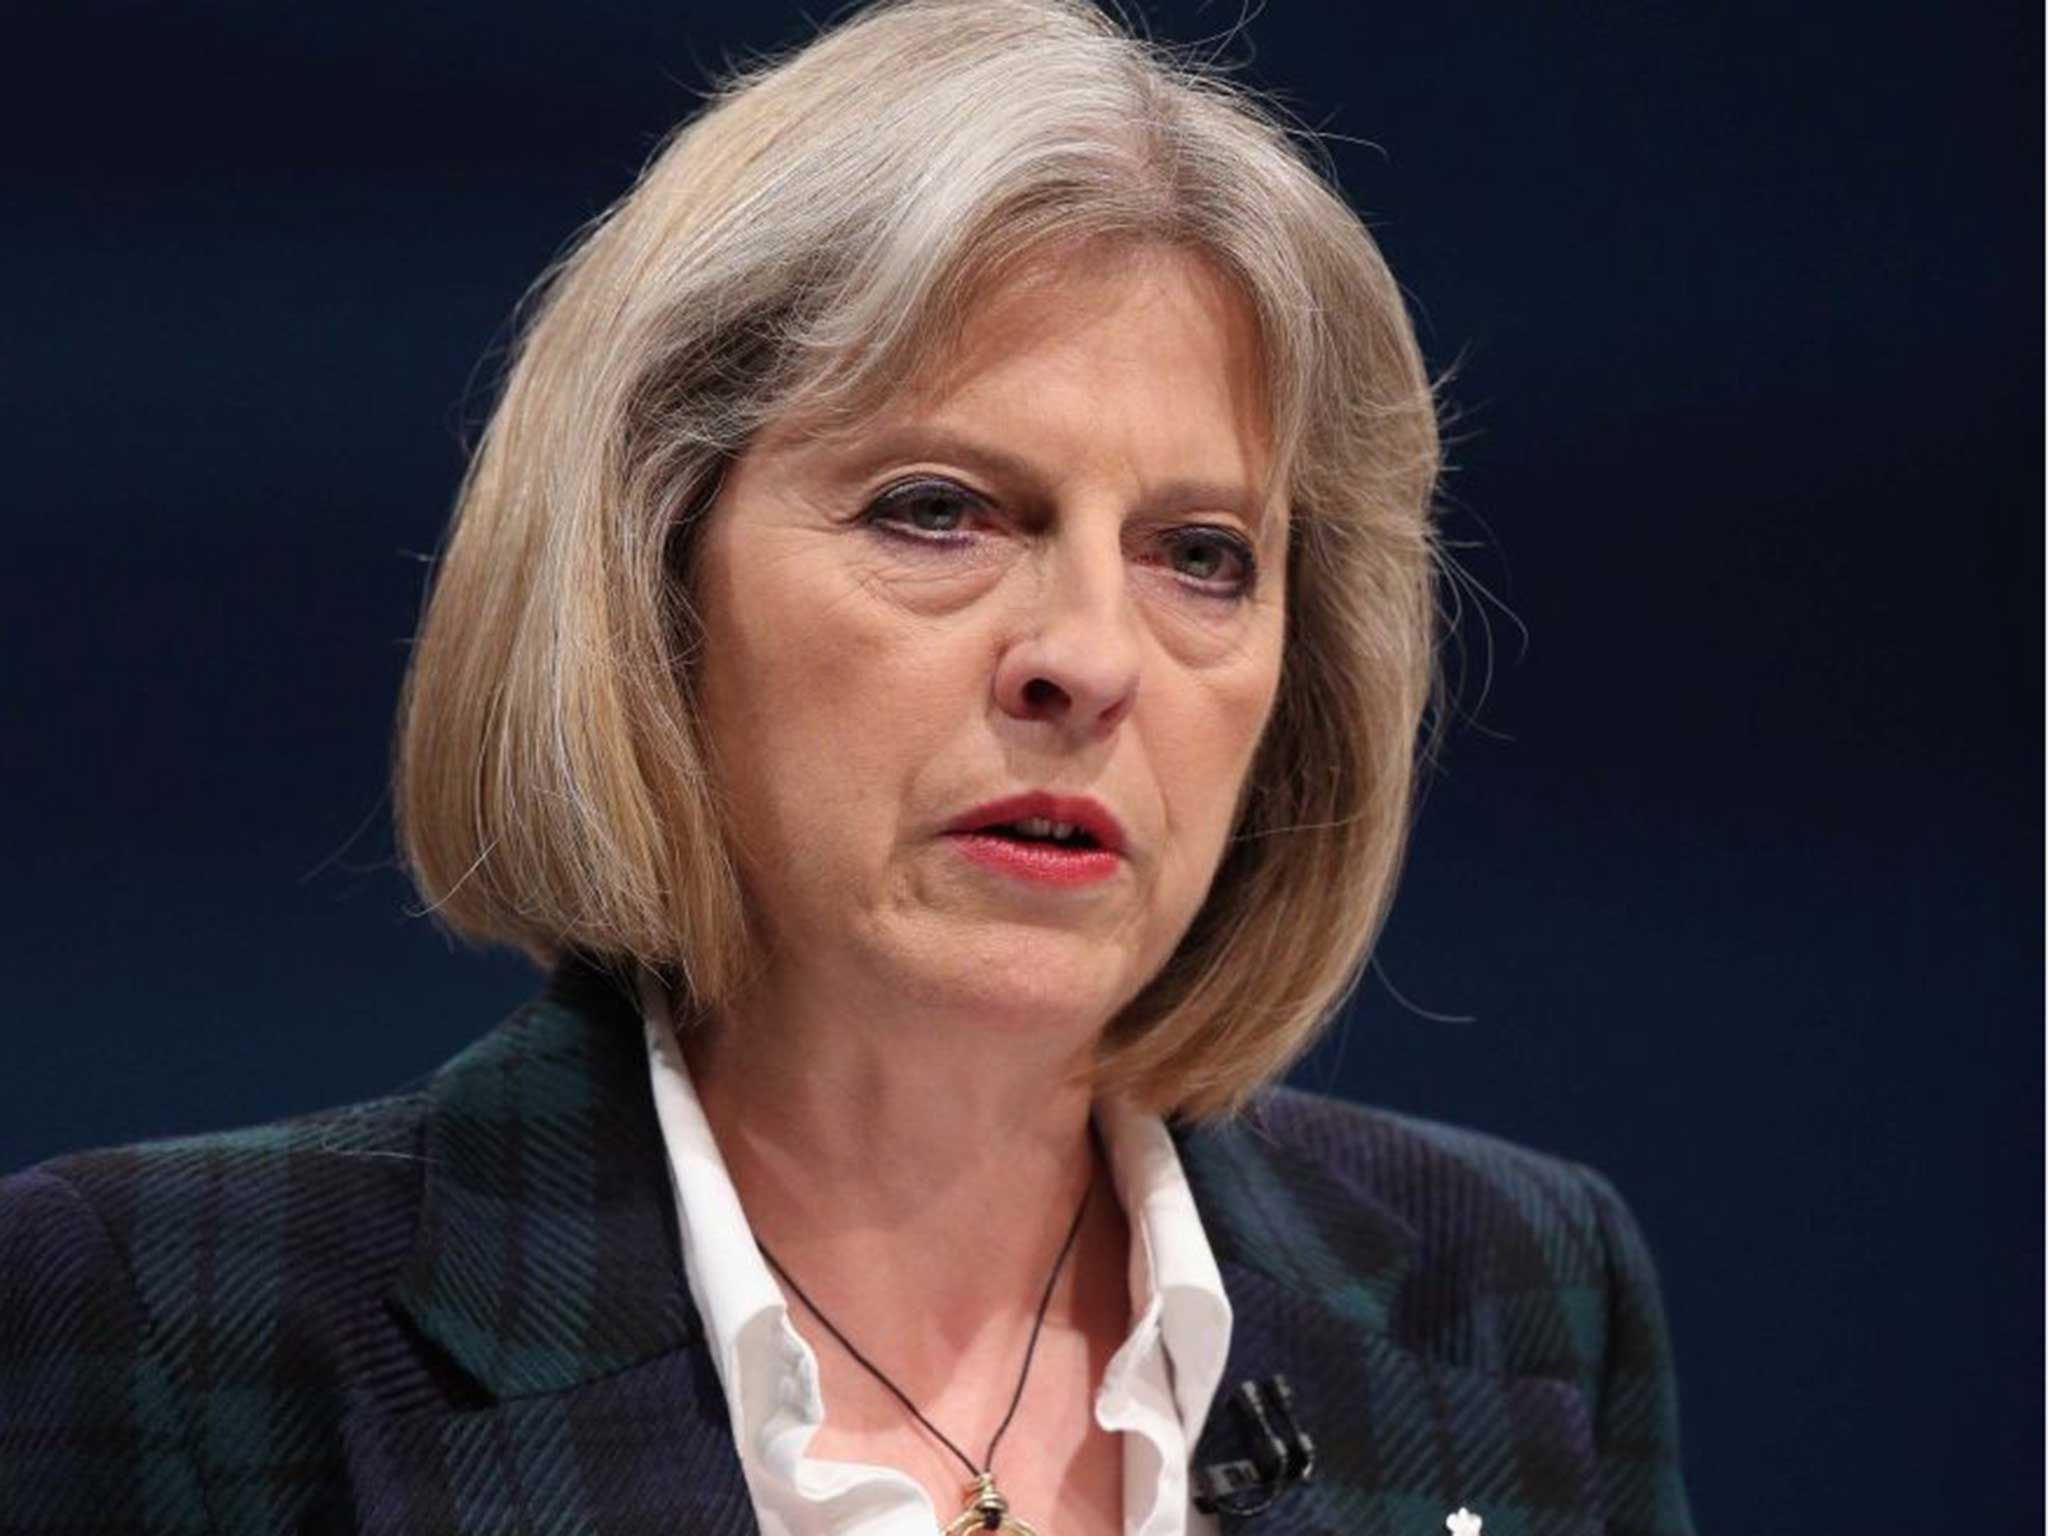 Theresa May has criticised 'the cowardly murder' of James Foley